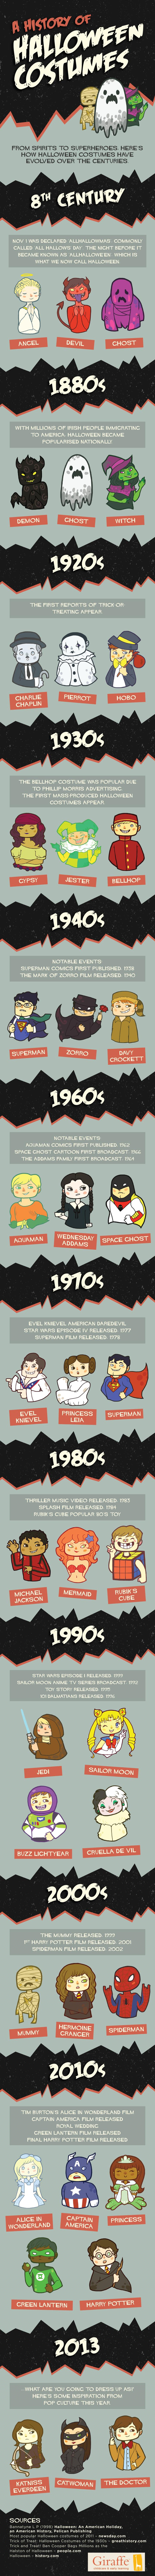 a-history-of-halloween-costumes-infographic